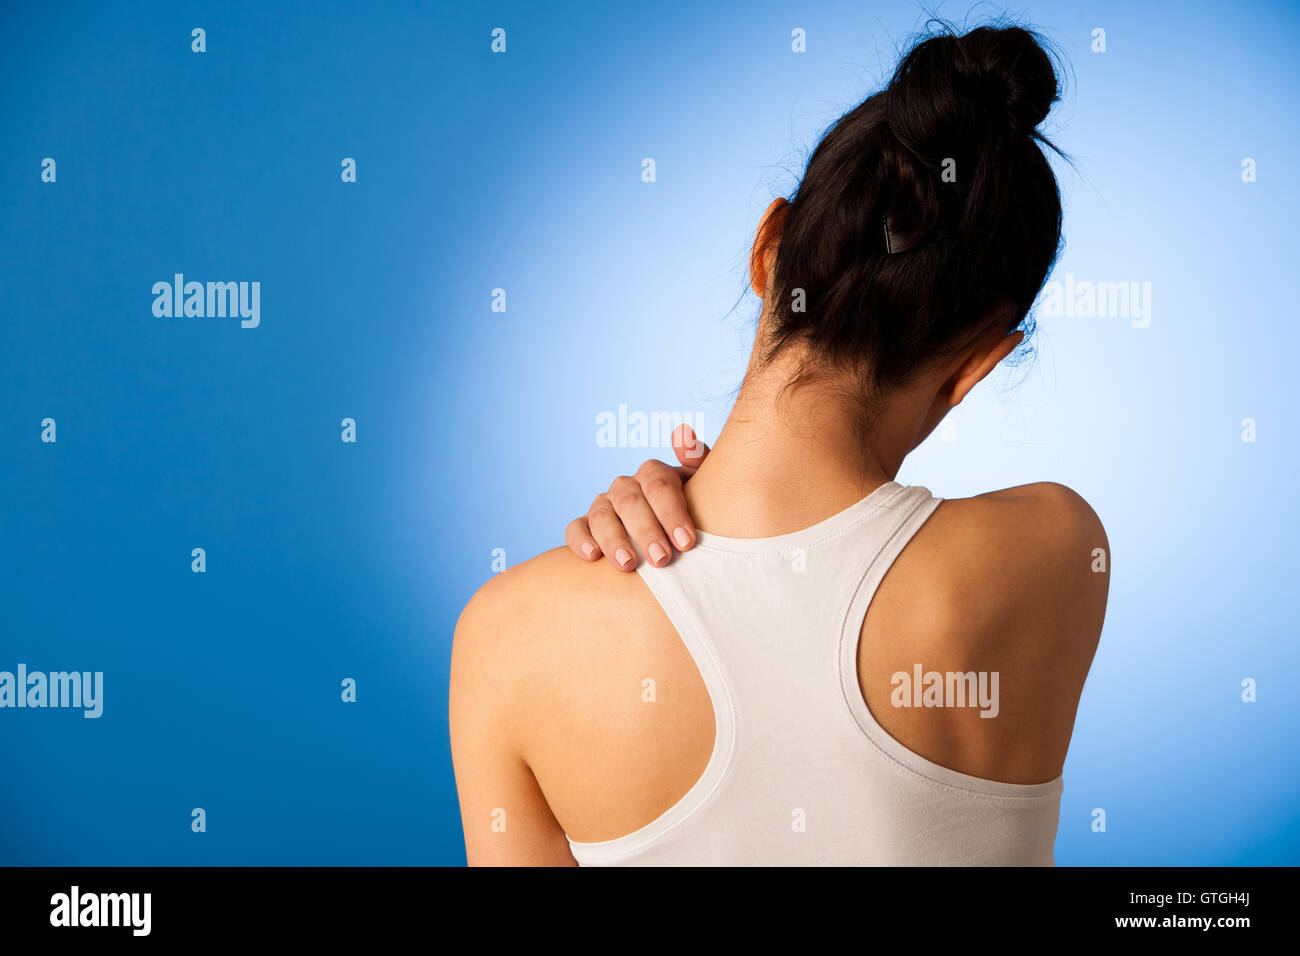 Woman having pain in her neck over blue background Stock Photo